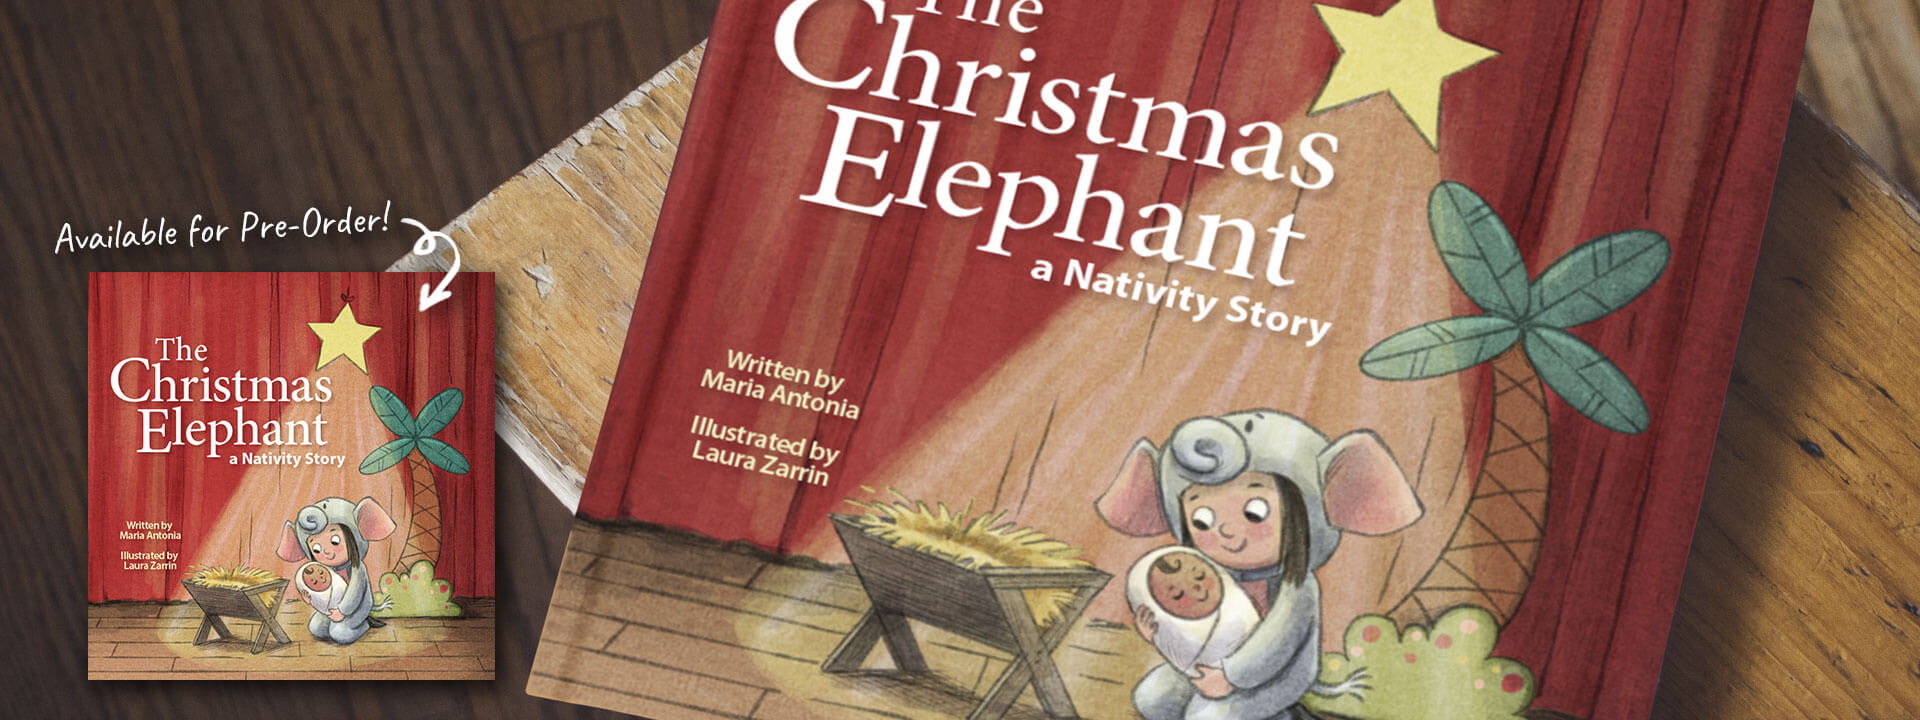 The Christmas Elephant, a picture book by Children's Author Maria Antonia